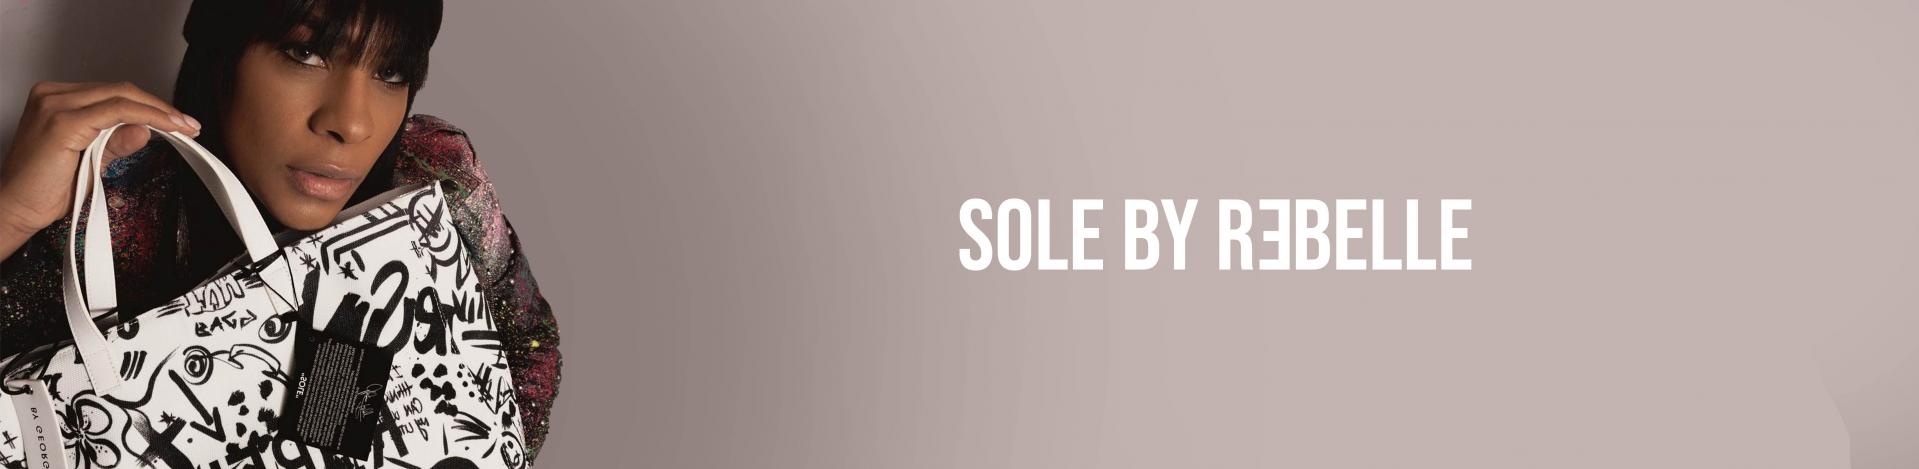 Charity project: SOLE by REBELLE in collaboration with Georgette Polizzi